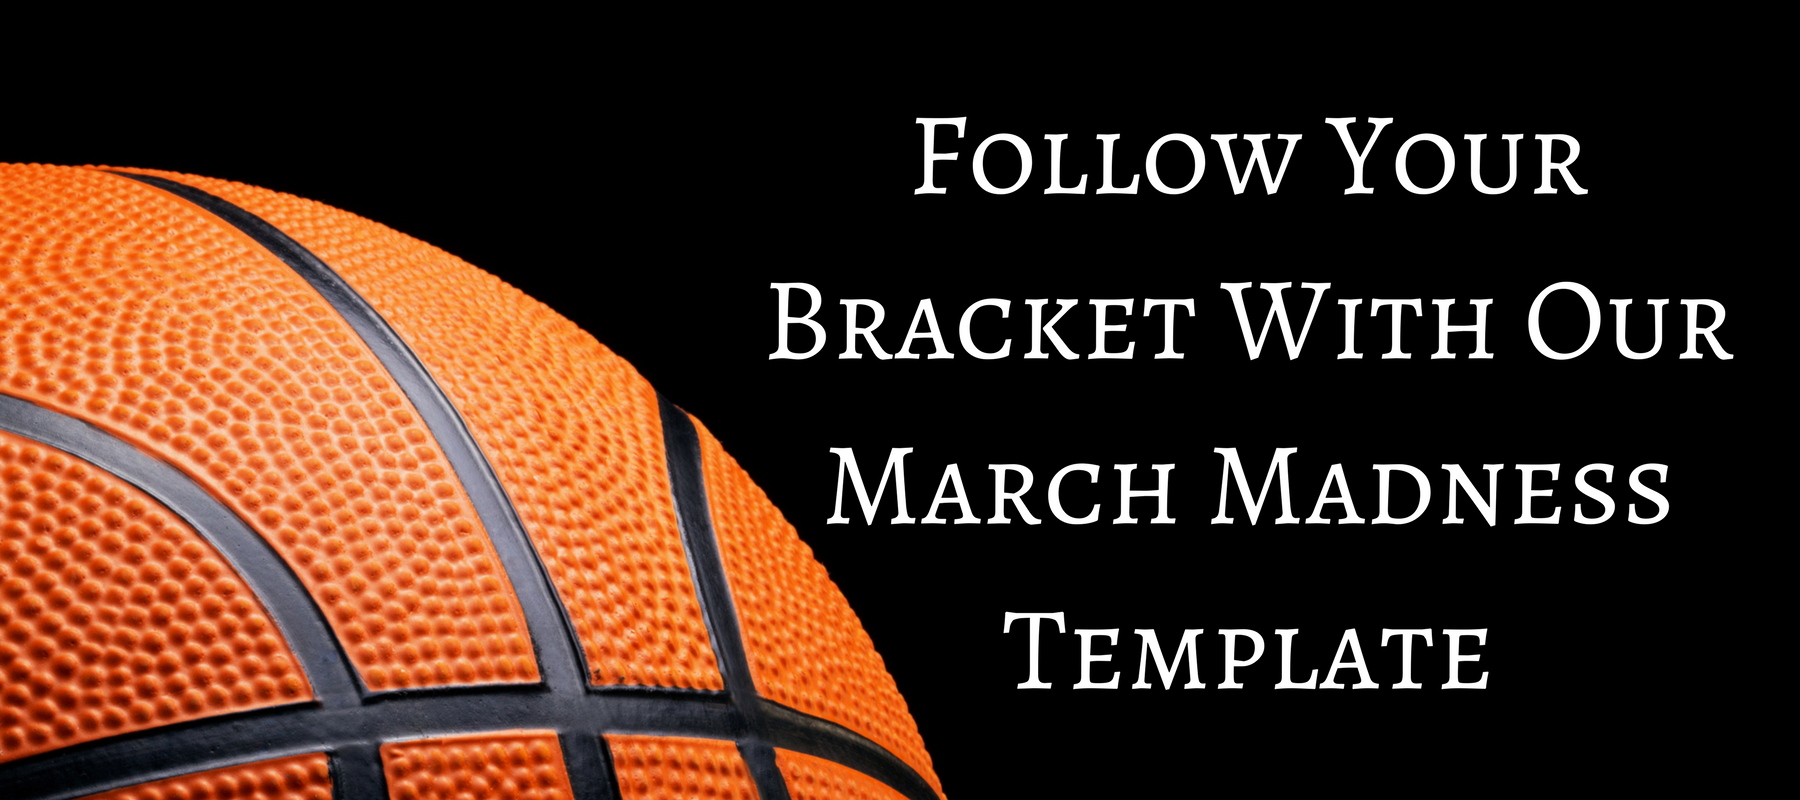 Follow Your Bracket With Our March Madness Template!